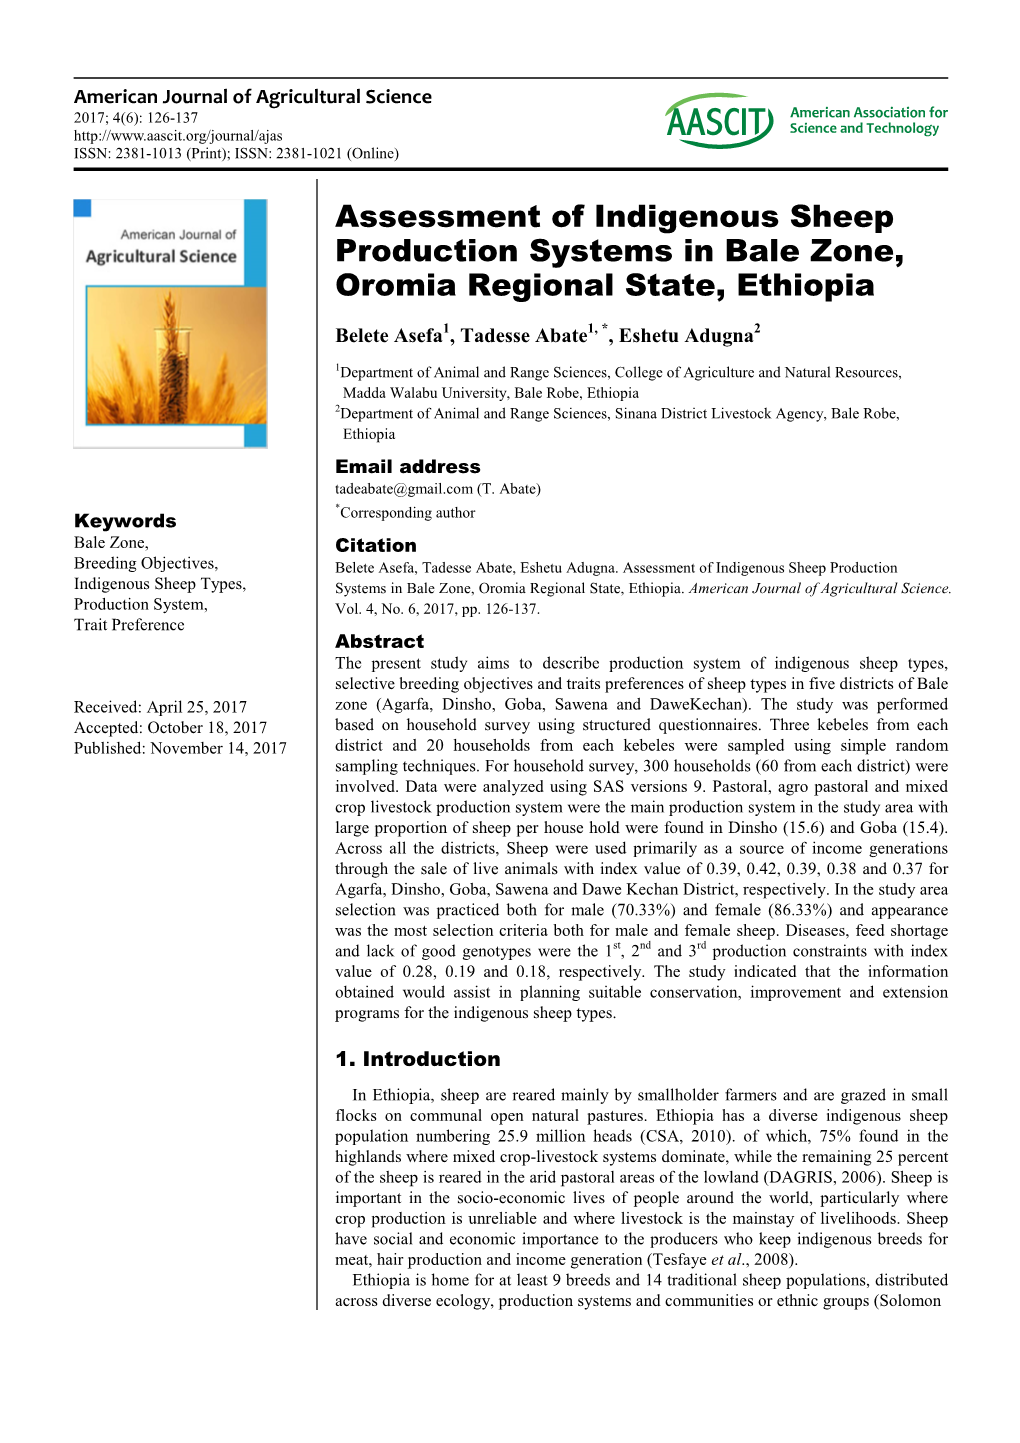 Assessment of Indigenous Sheep Production Systems in Bale Zone, Oromia Regional State, Ethiopia